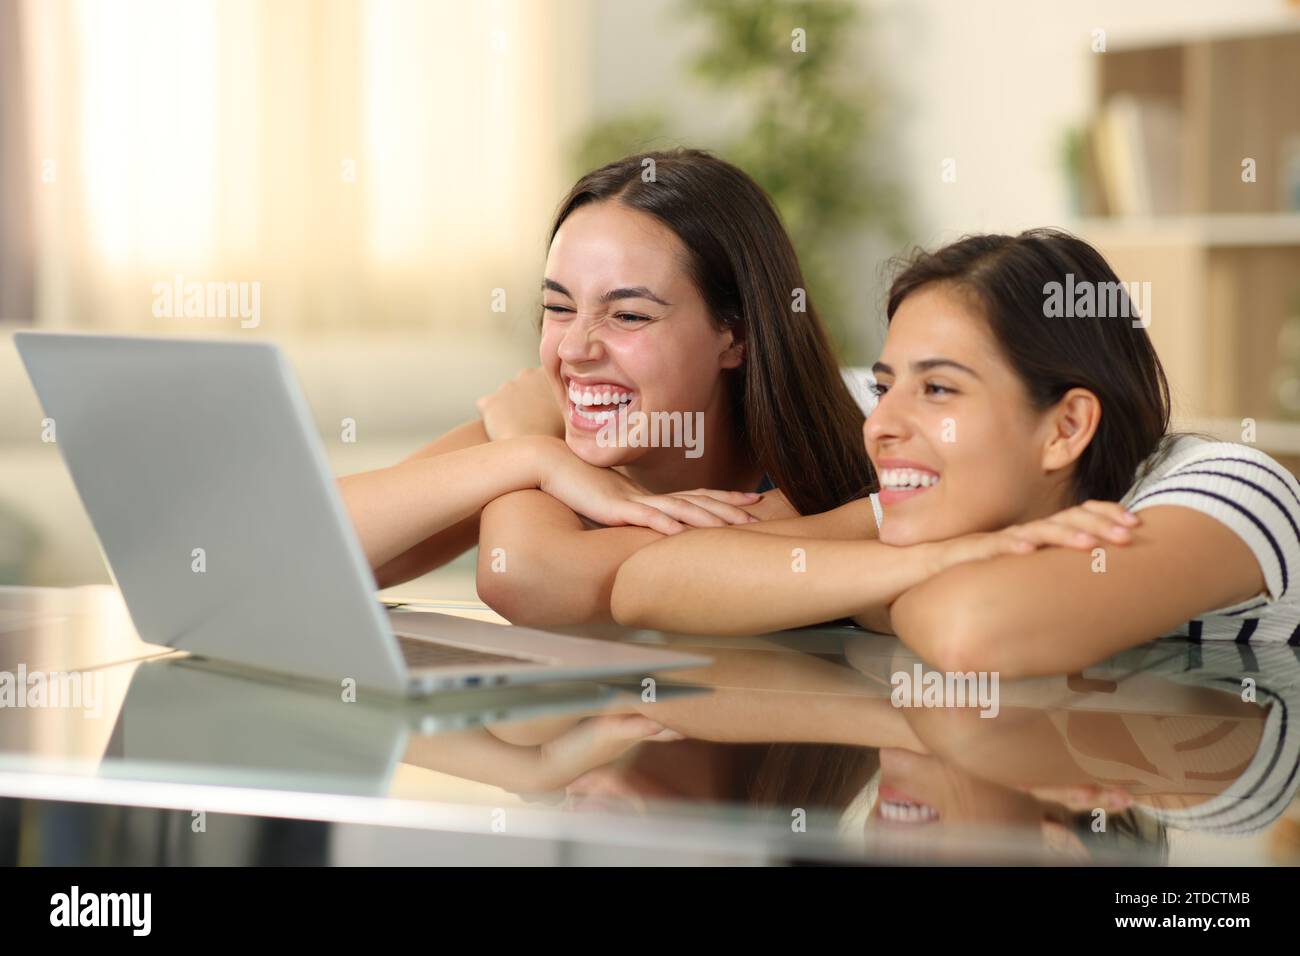 Two happy women laughing watching media on laptop at home Stock Photo